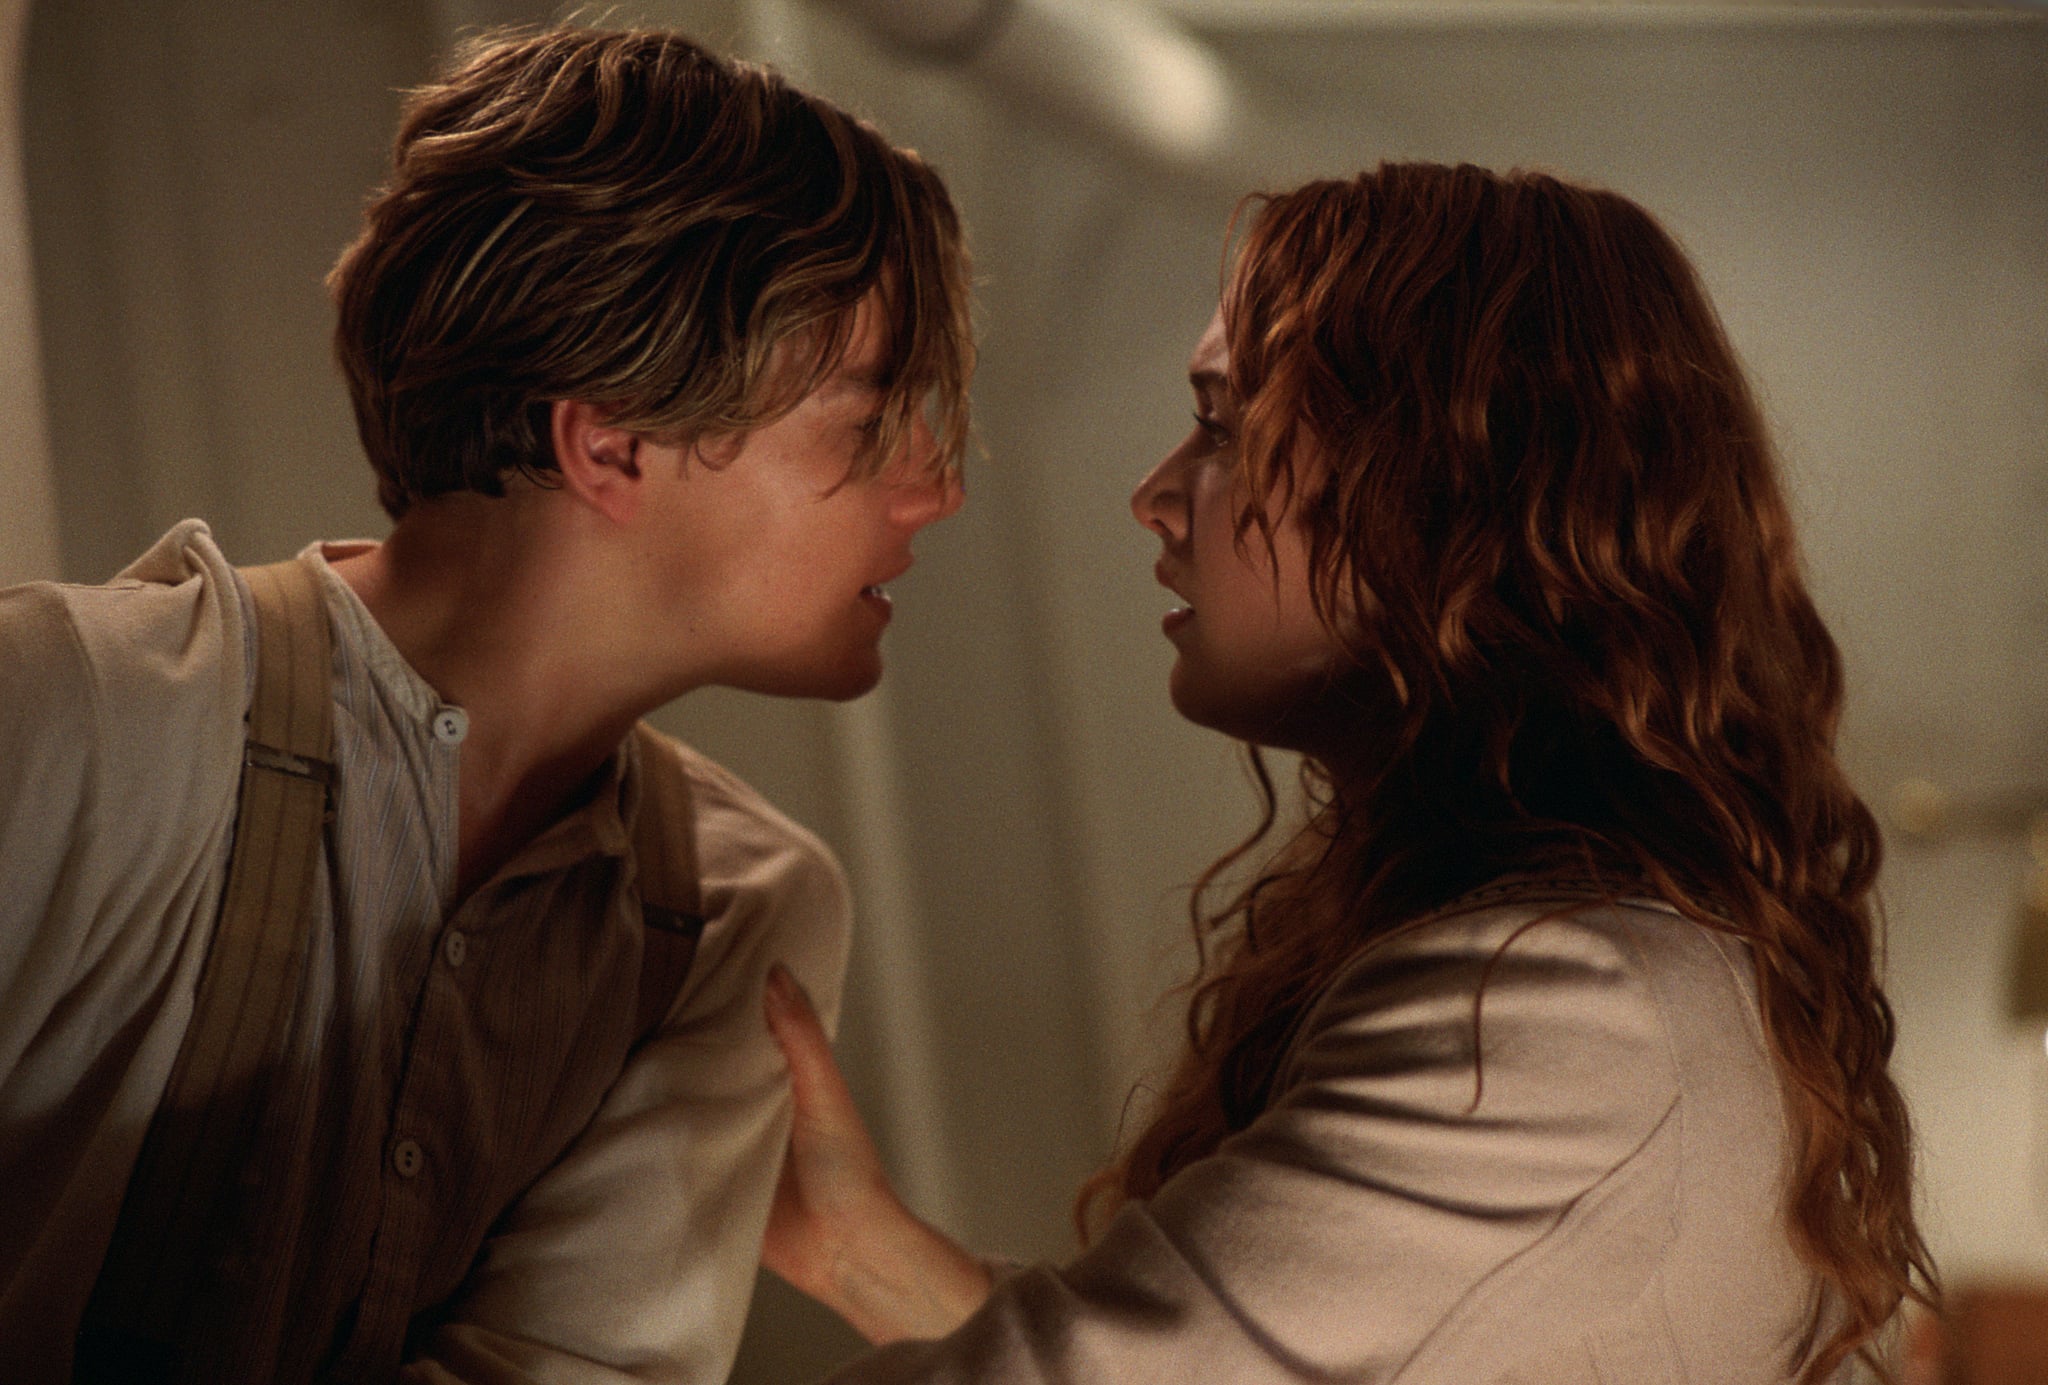 Leonardo DiCaprio and Kate Winslet in Titanic. | The Original Titanic Will Make You Swoon Even Harder After 20 | POPSUGAR Entertainment Photo 26